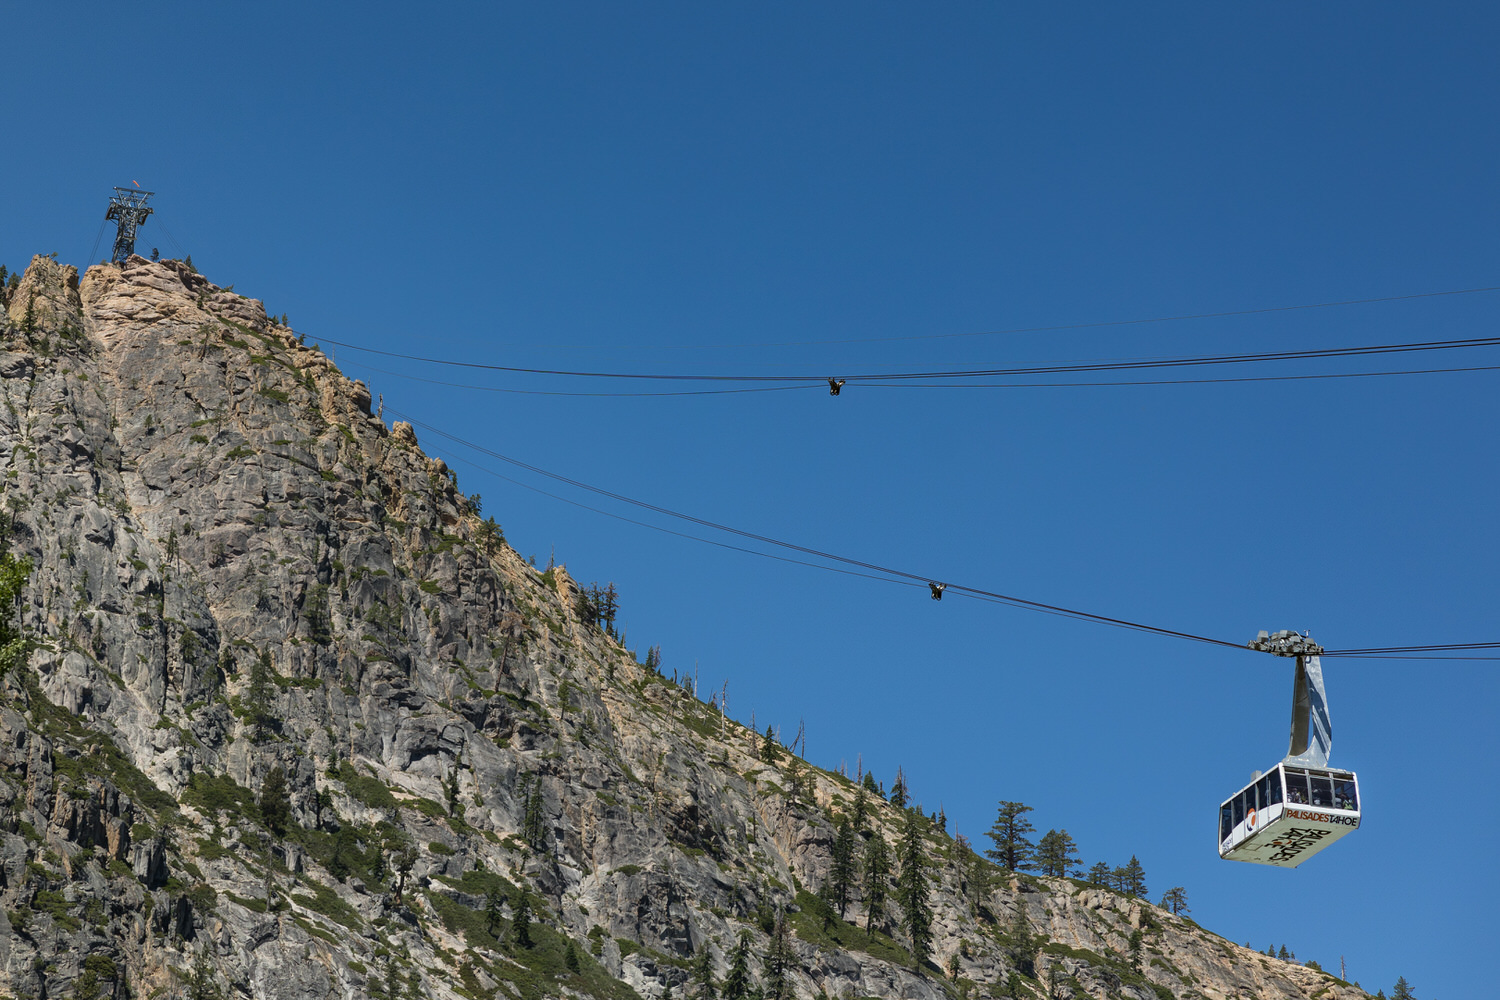 Wedding guests ride in an aerial tram to reach the High Camp ceremony venue.